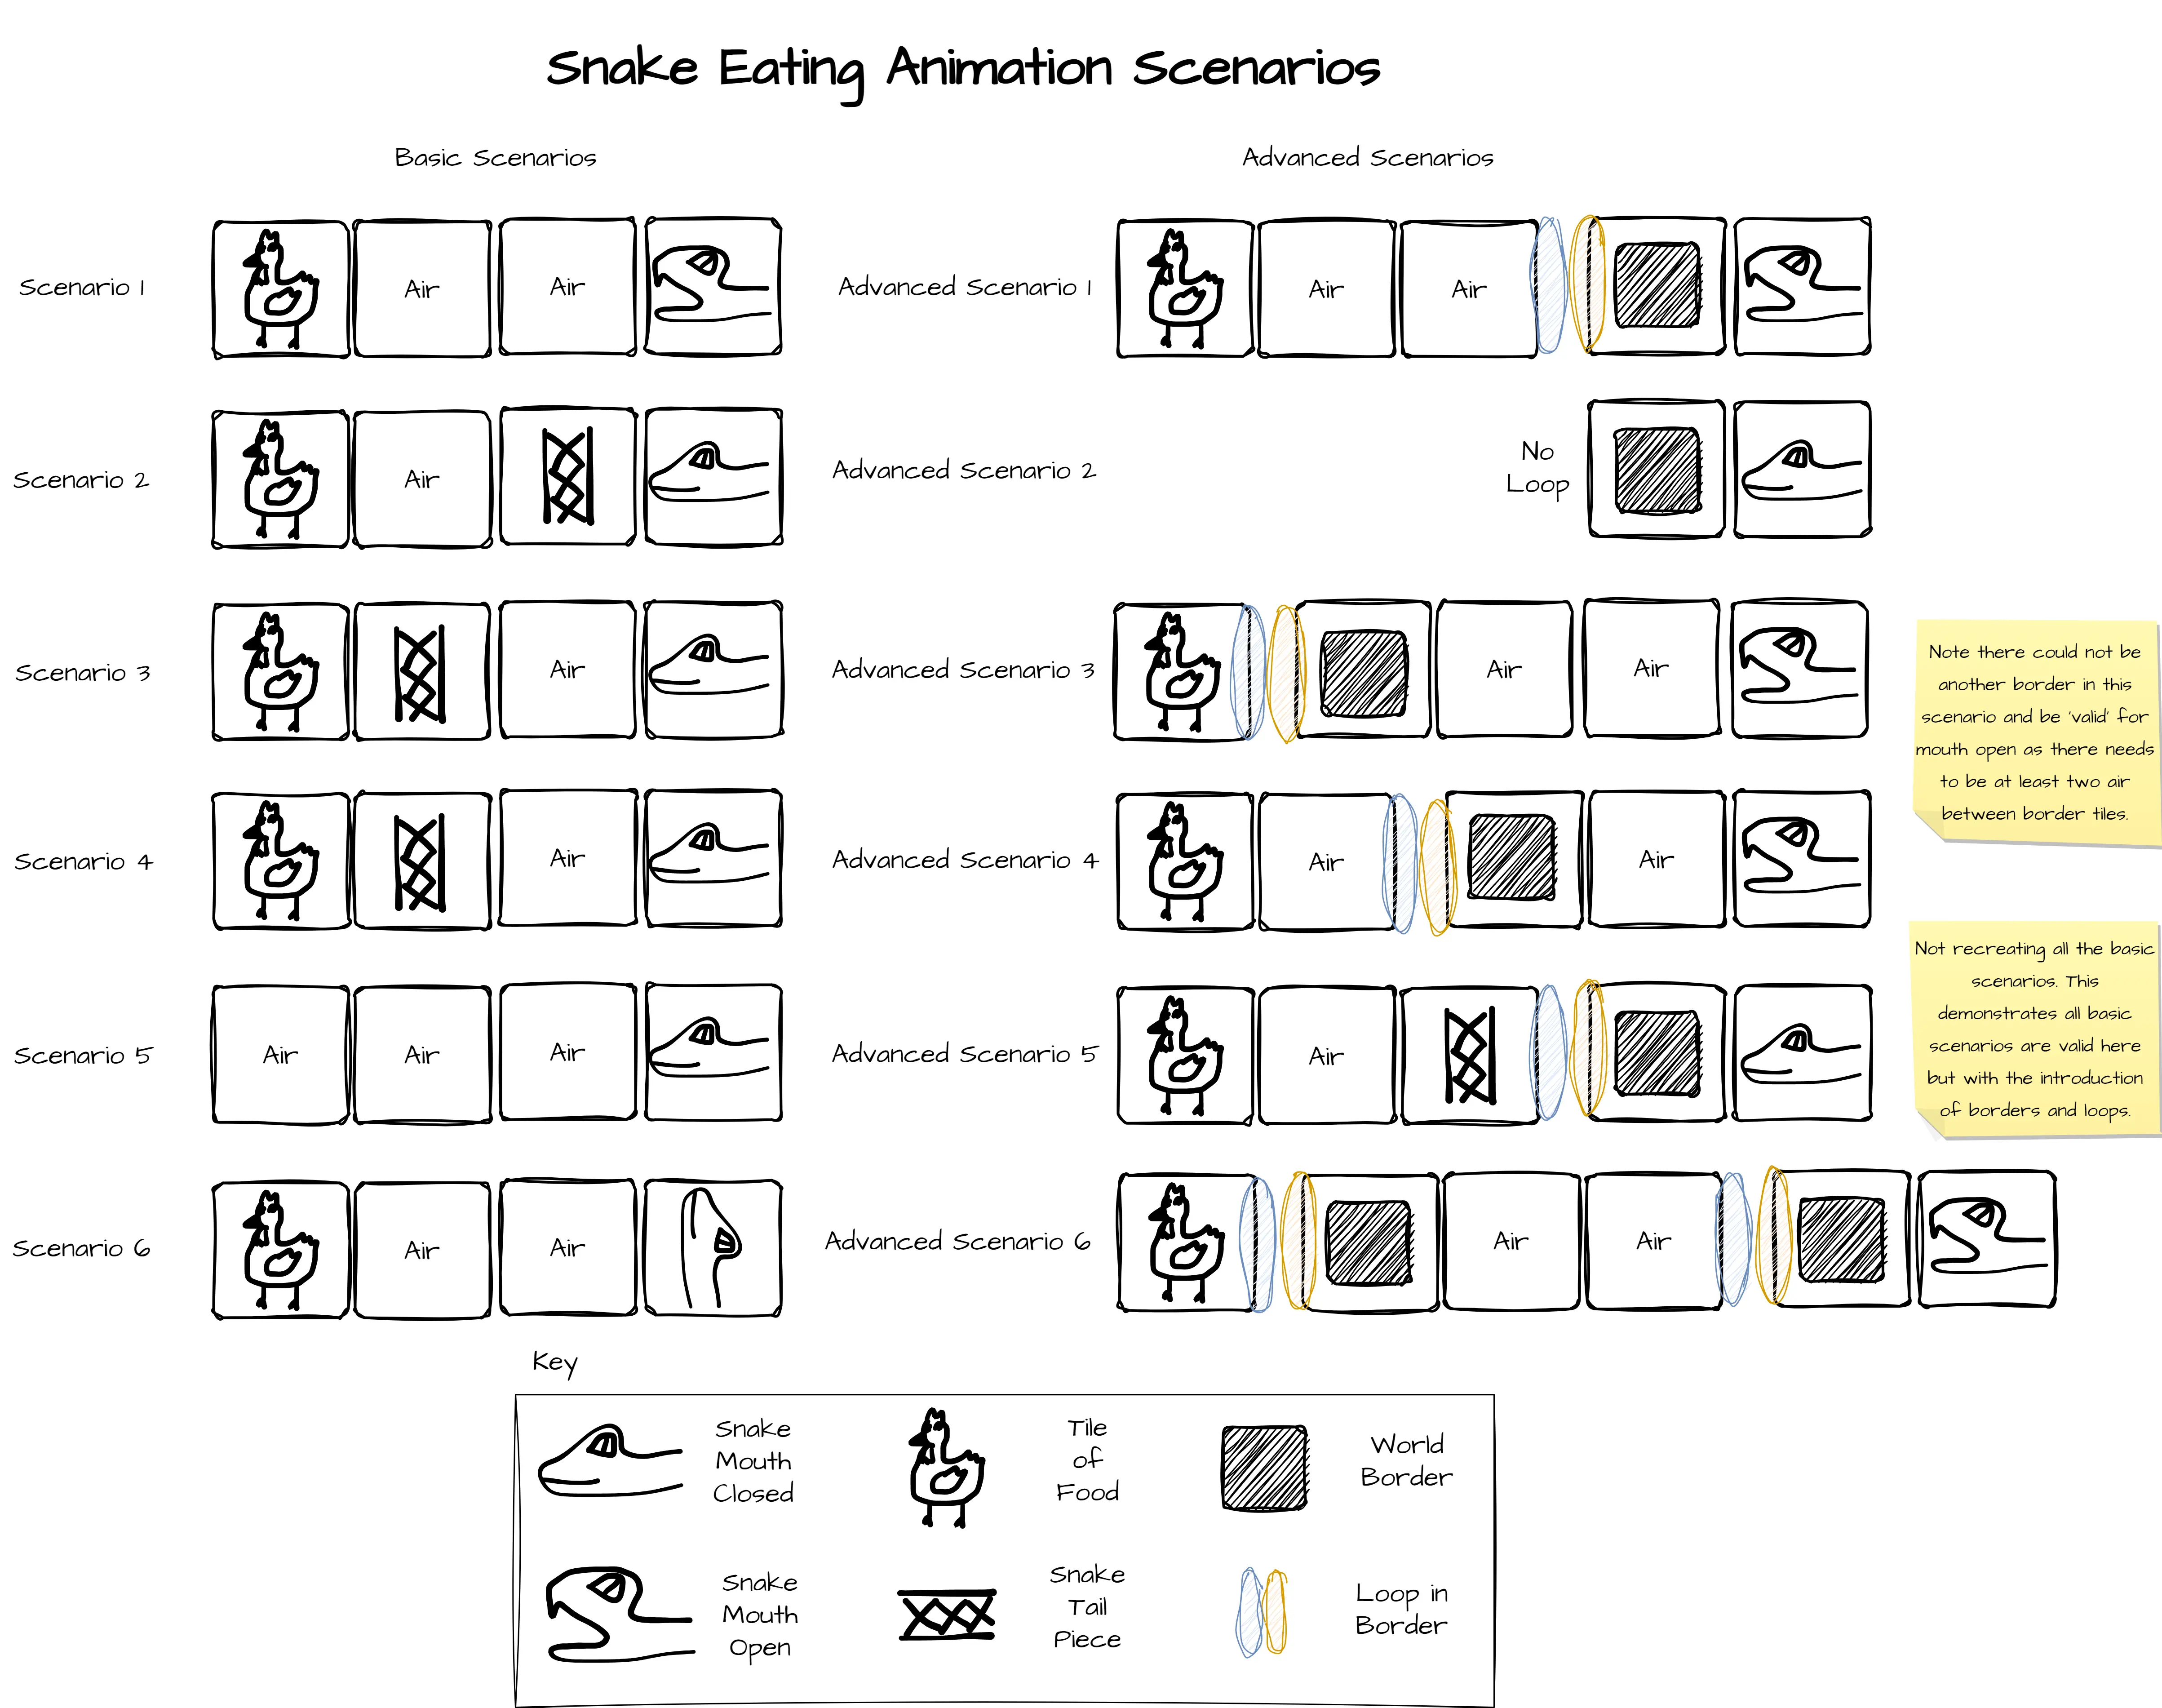 Snake Game Plans for Snake Head animations